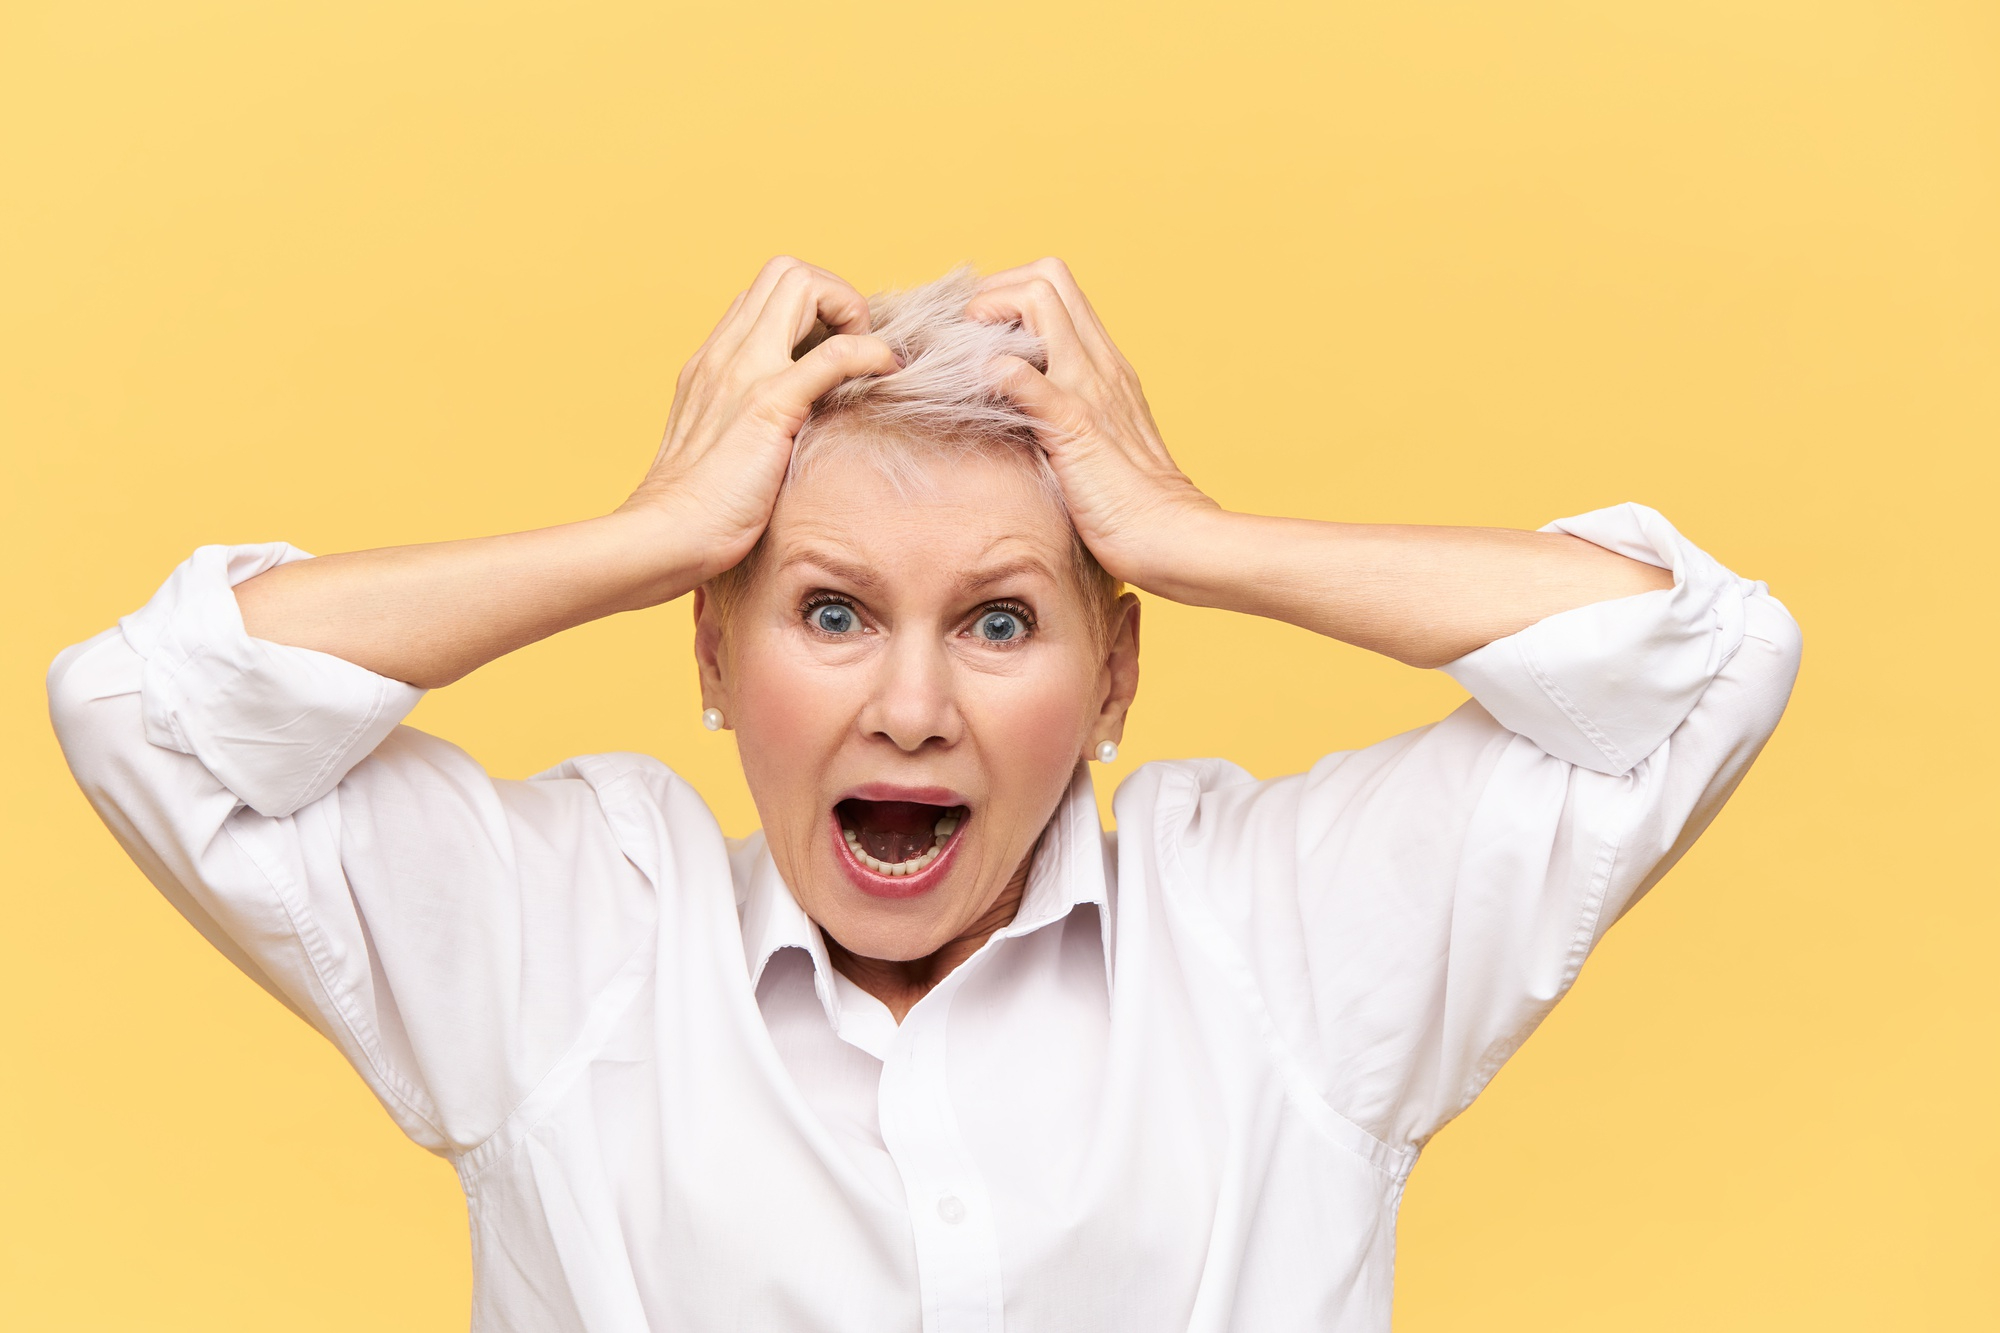 An angry middle-aged woman with her hands on her head | Source: Freepik